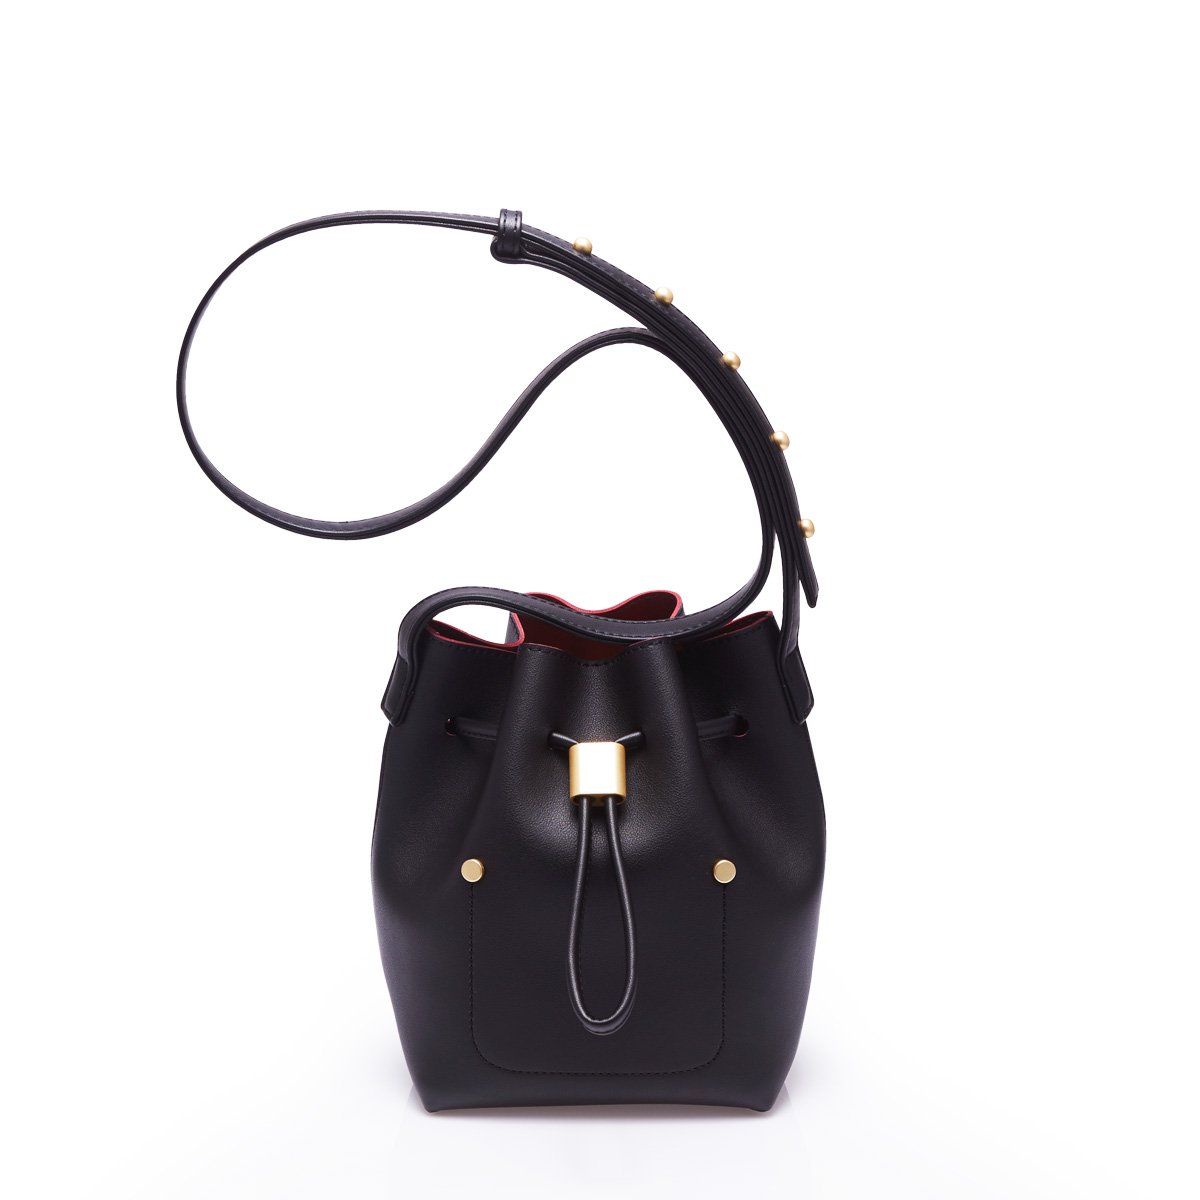 The Popular Bucket Bag From Sometime By Asian Designers Just Got A ...